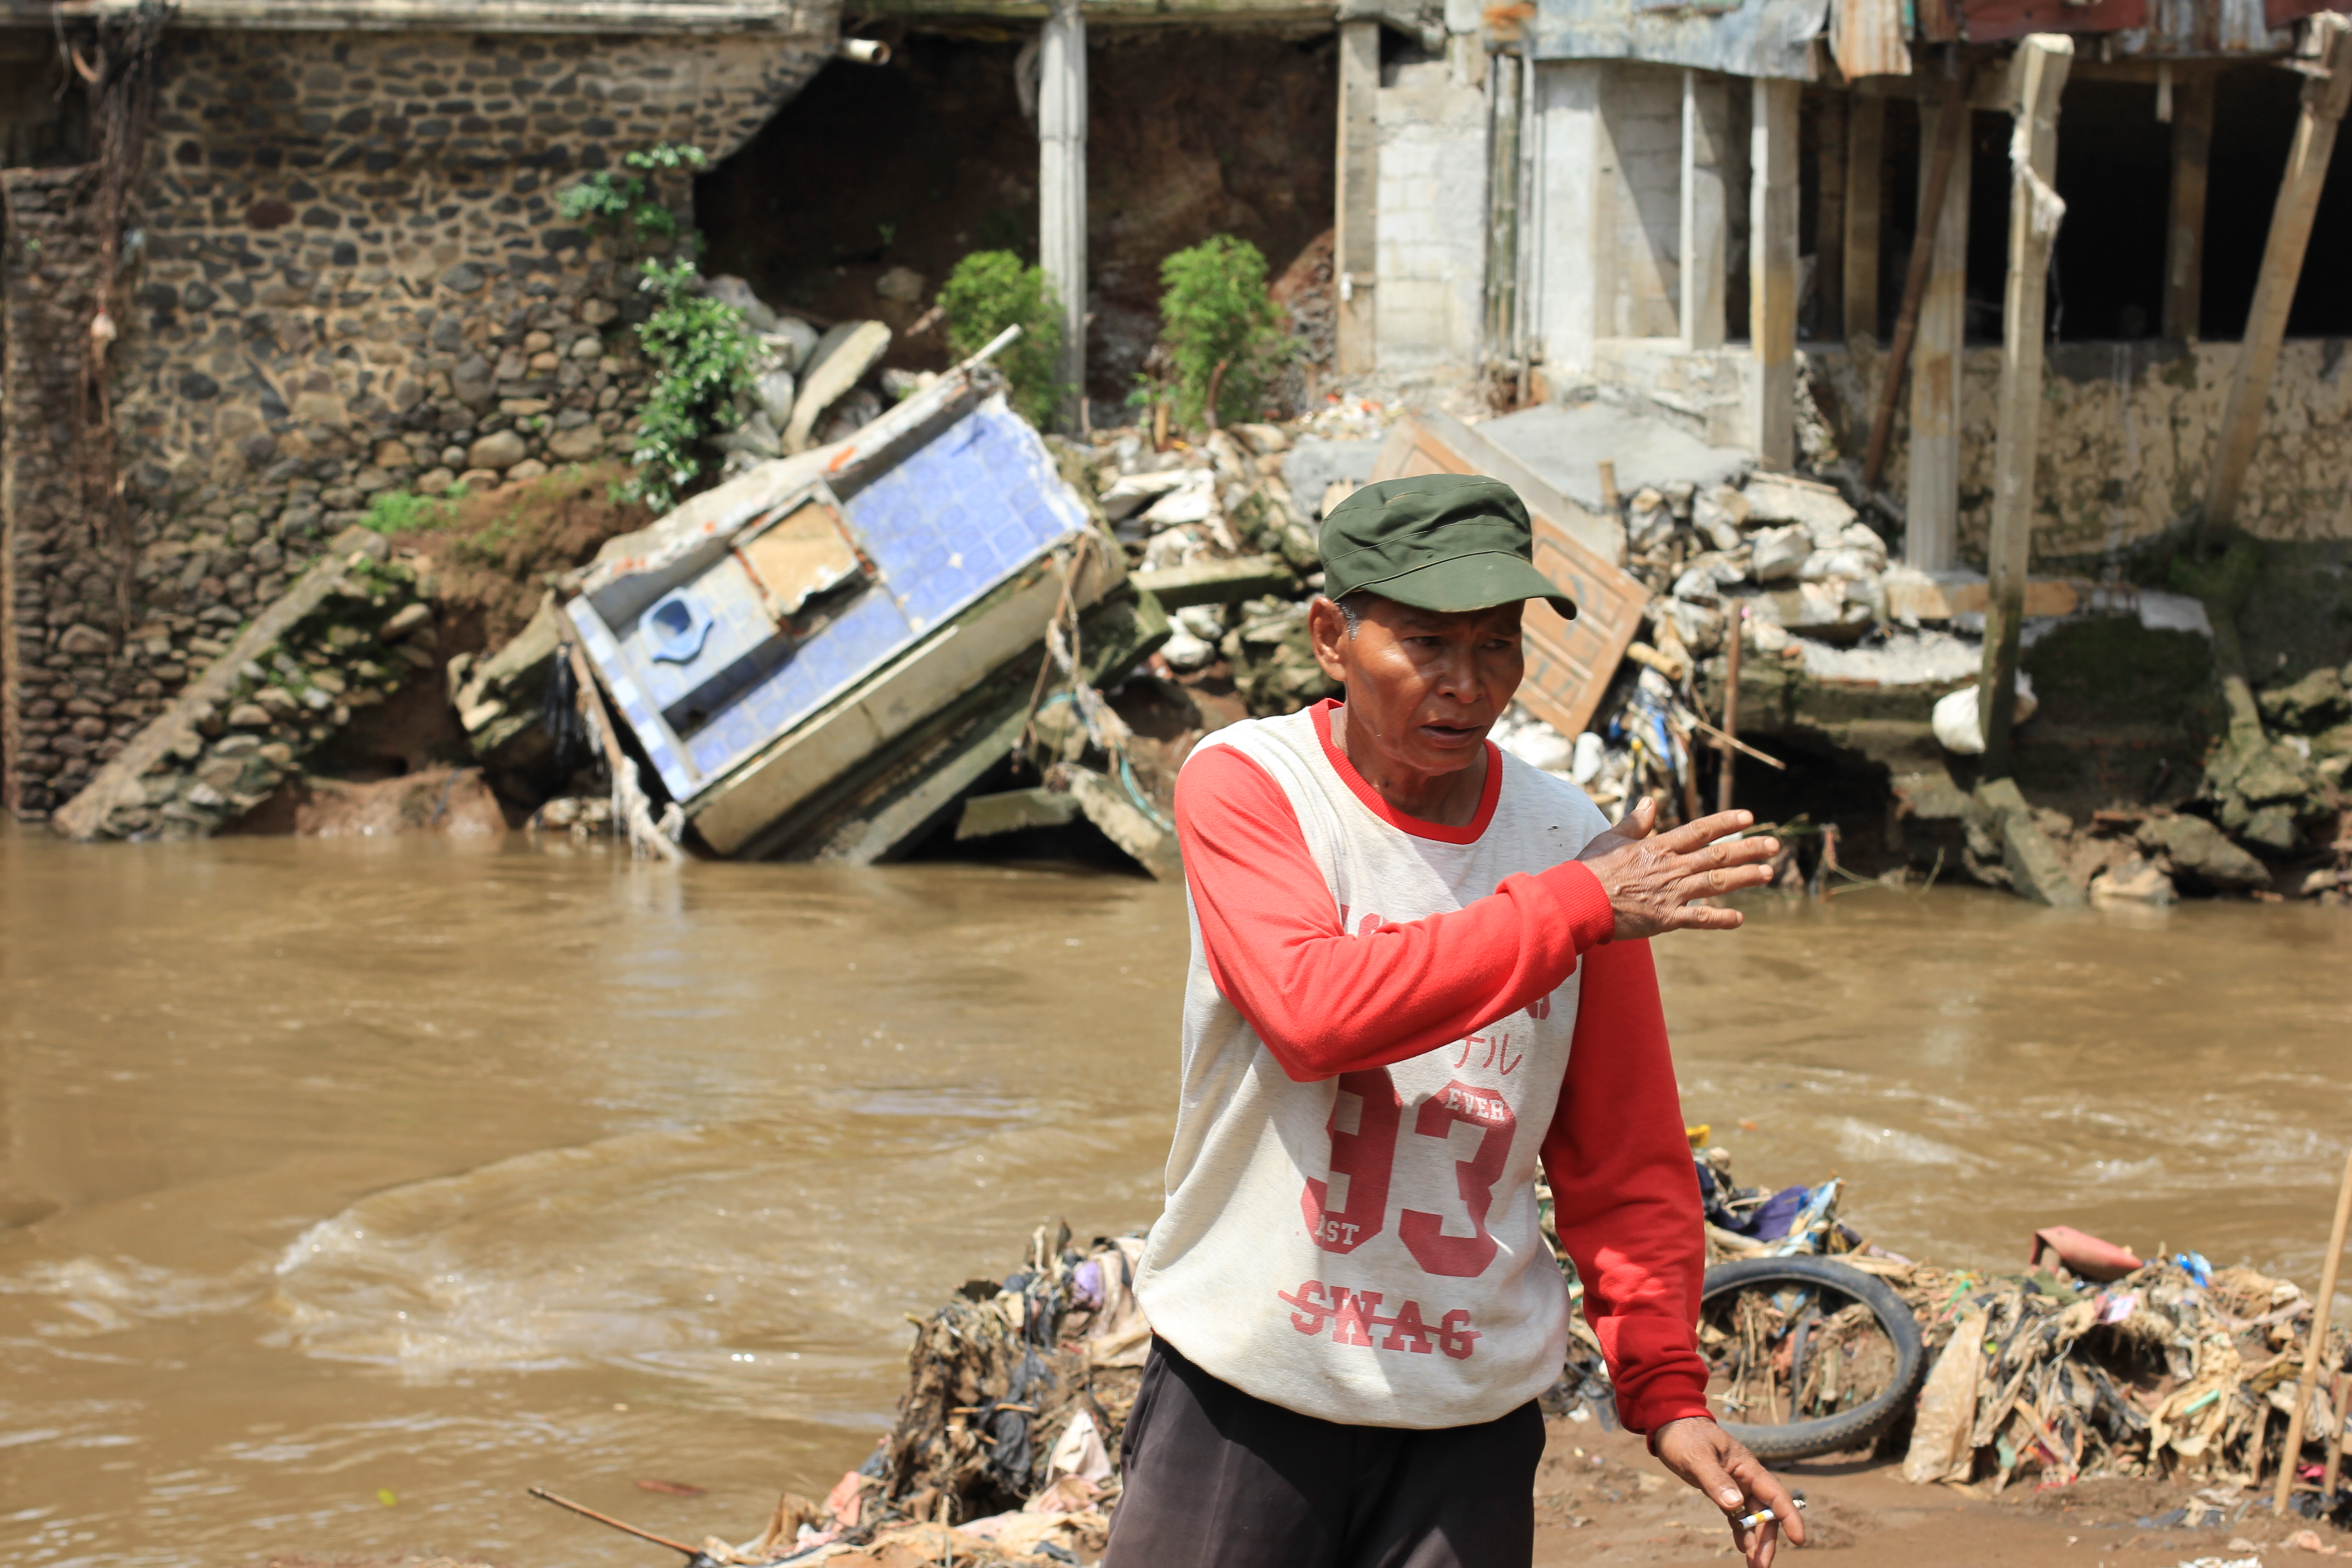 Image of a resident of Central Jakarta in flooded Ciliwung River in January 2020 